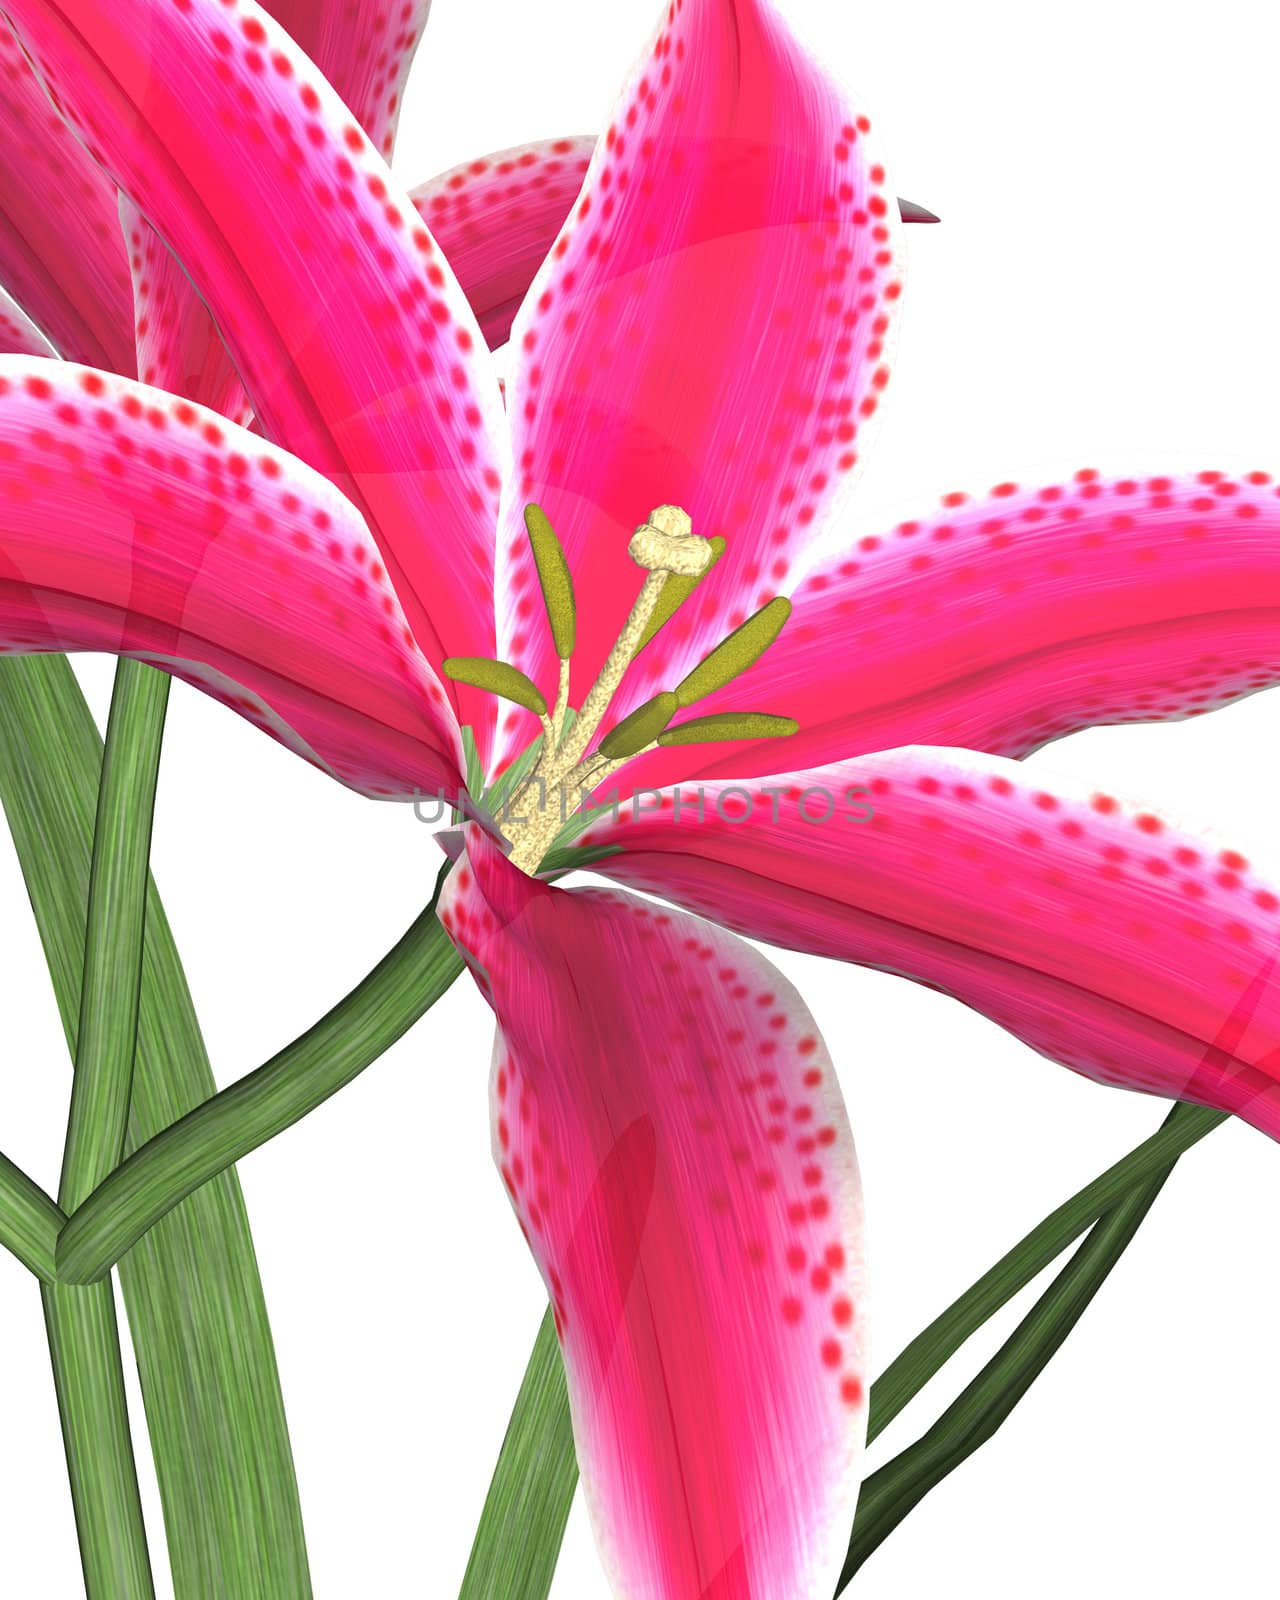 Large pink lily on a white background